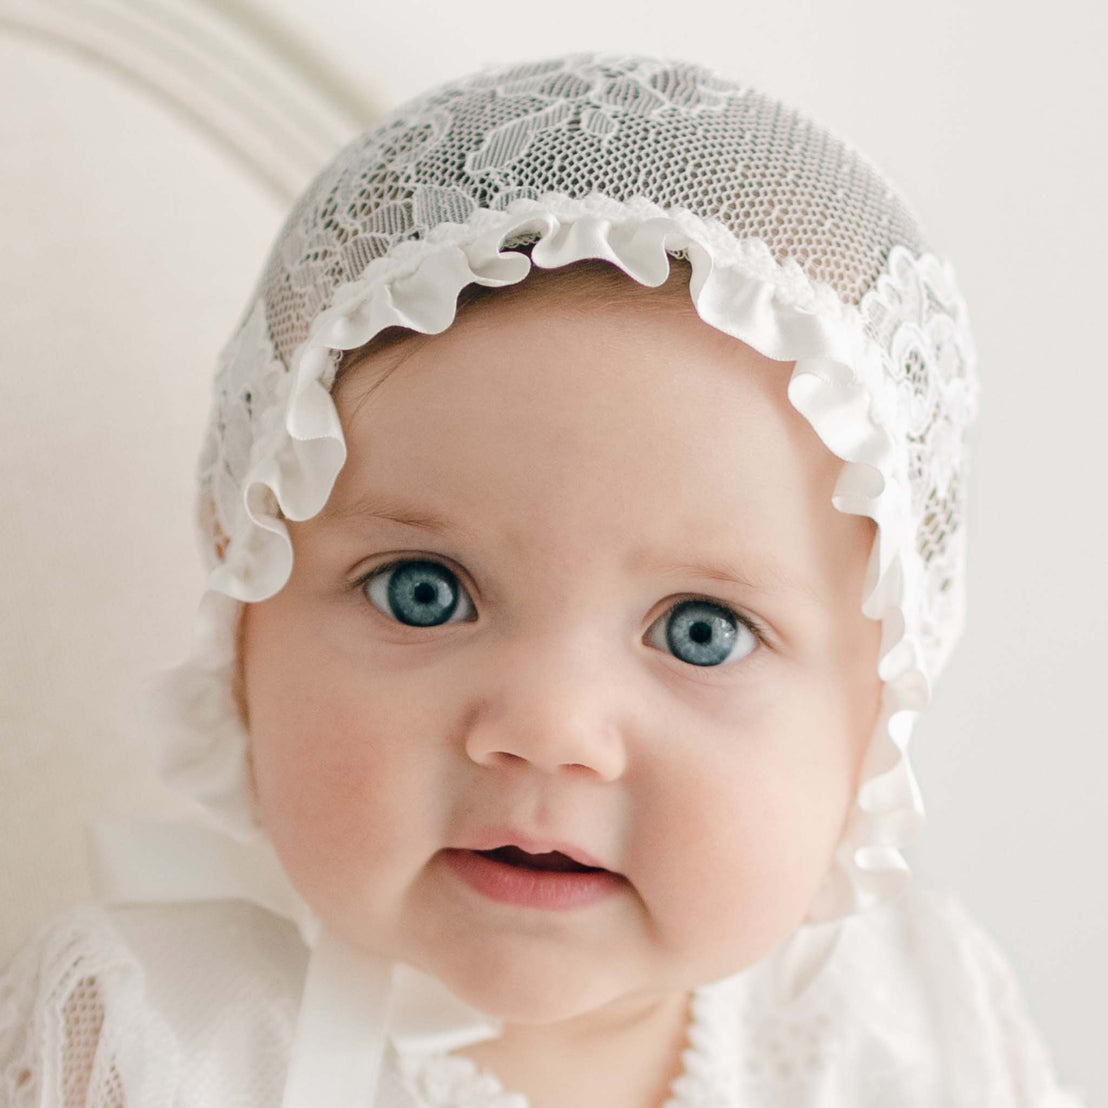 A baby with blue eyes is wearing a white Victoria Puff Sleeve Christening Gown & Bonnet, a matching outfit, and an exquisite baptism gown. The baby's expression is neutral, and the background is plain and light-colored.